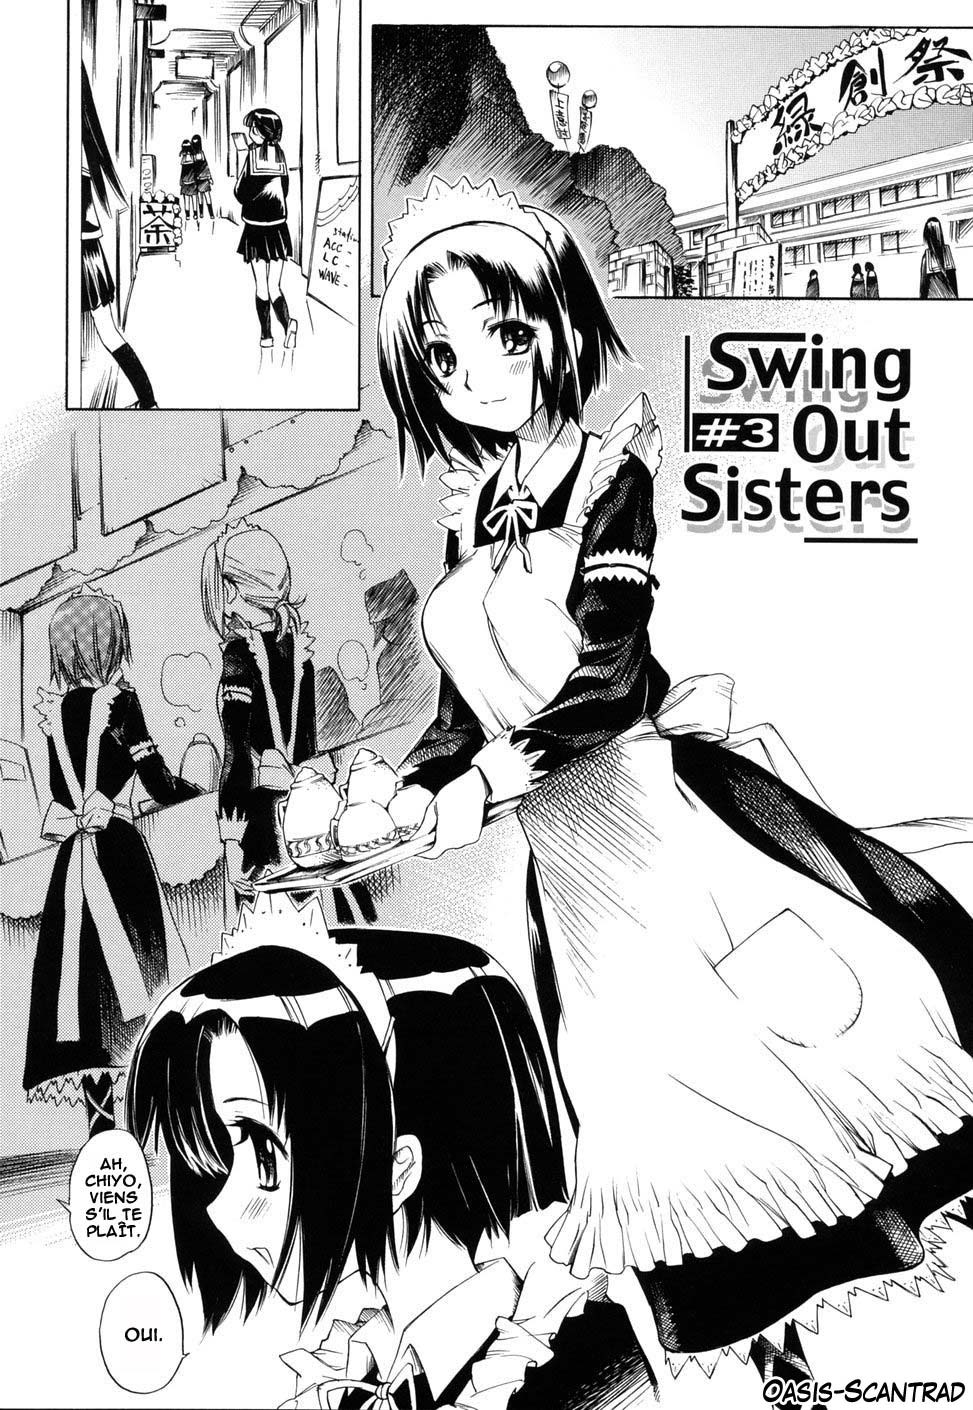 Swing Out Sisters numero d'image 43